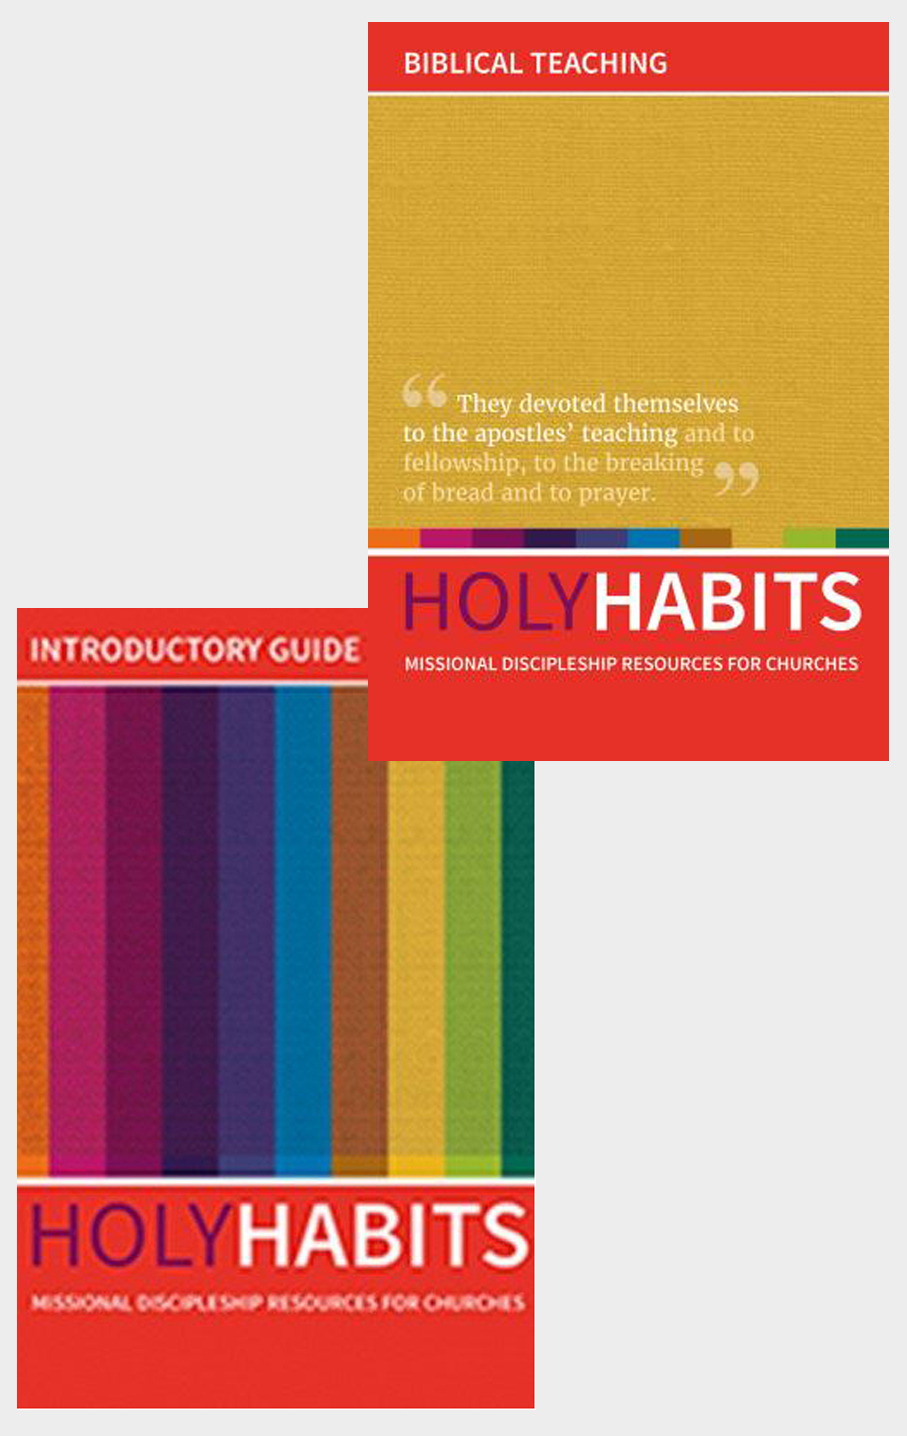 Holy Habits Introductory Guide and Biblical Teaching